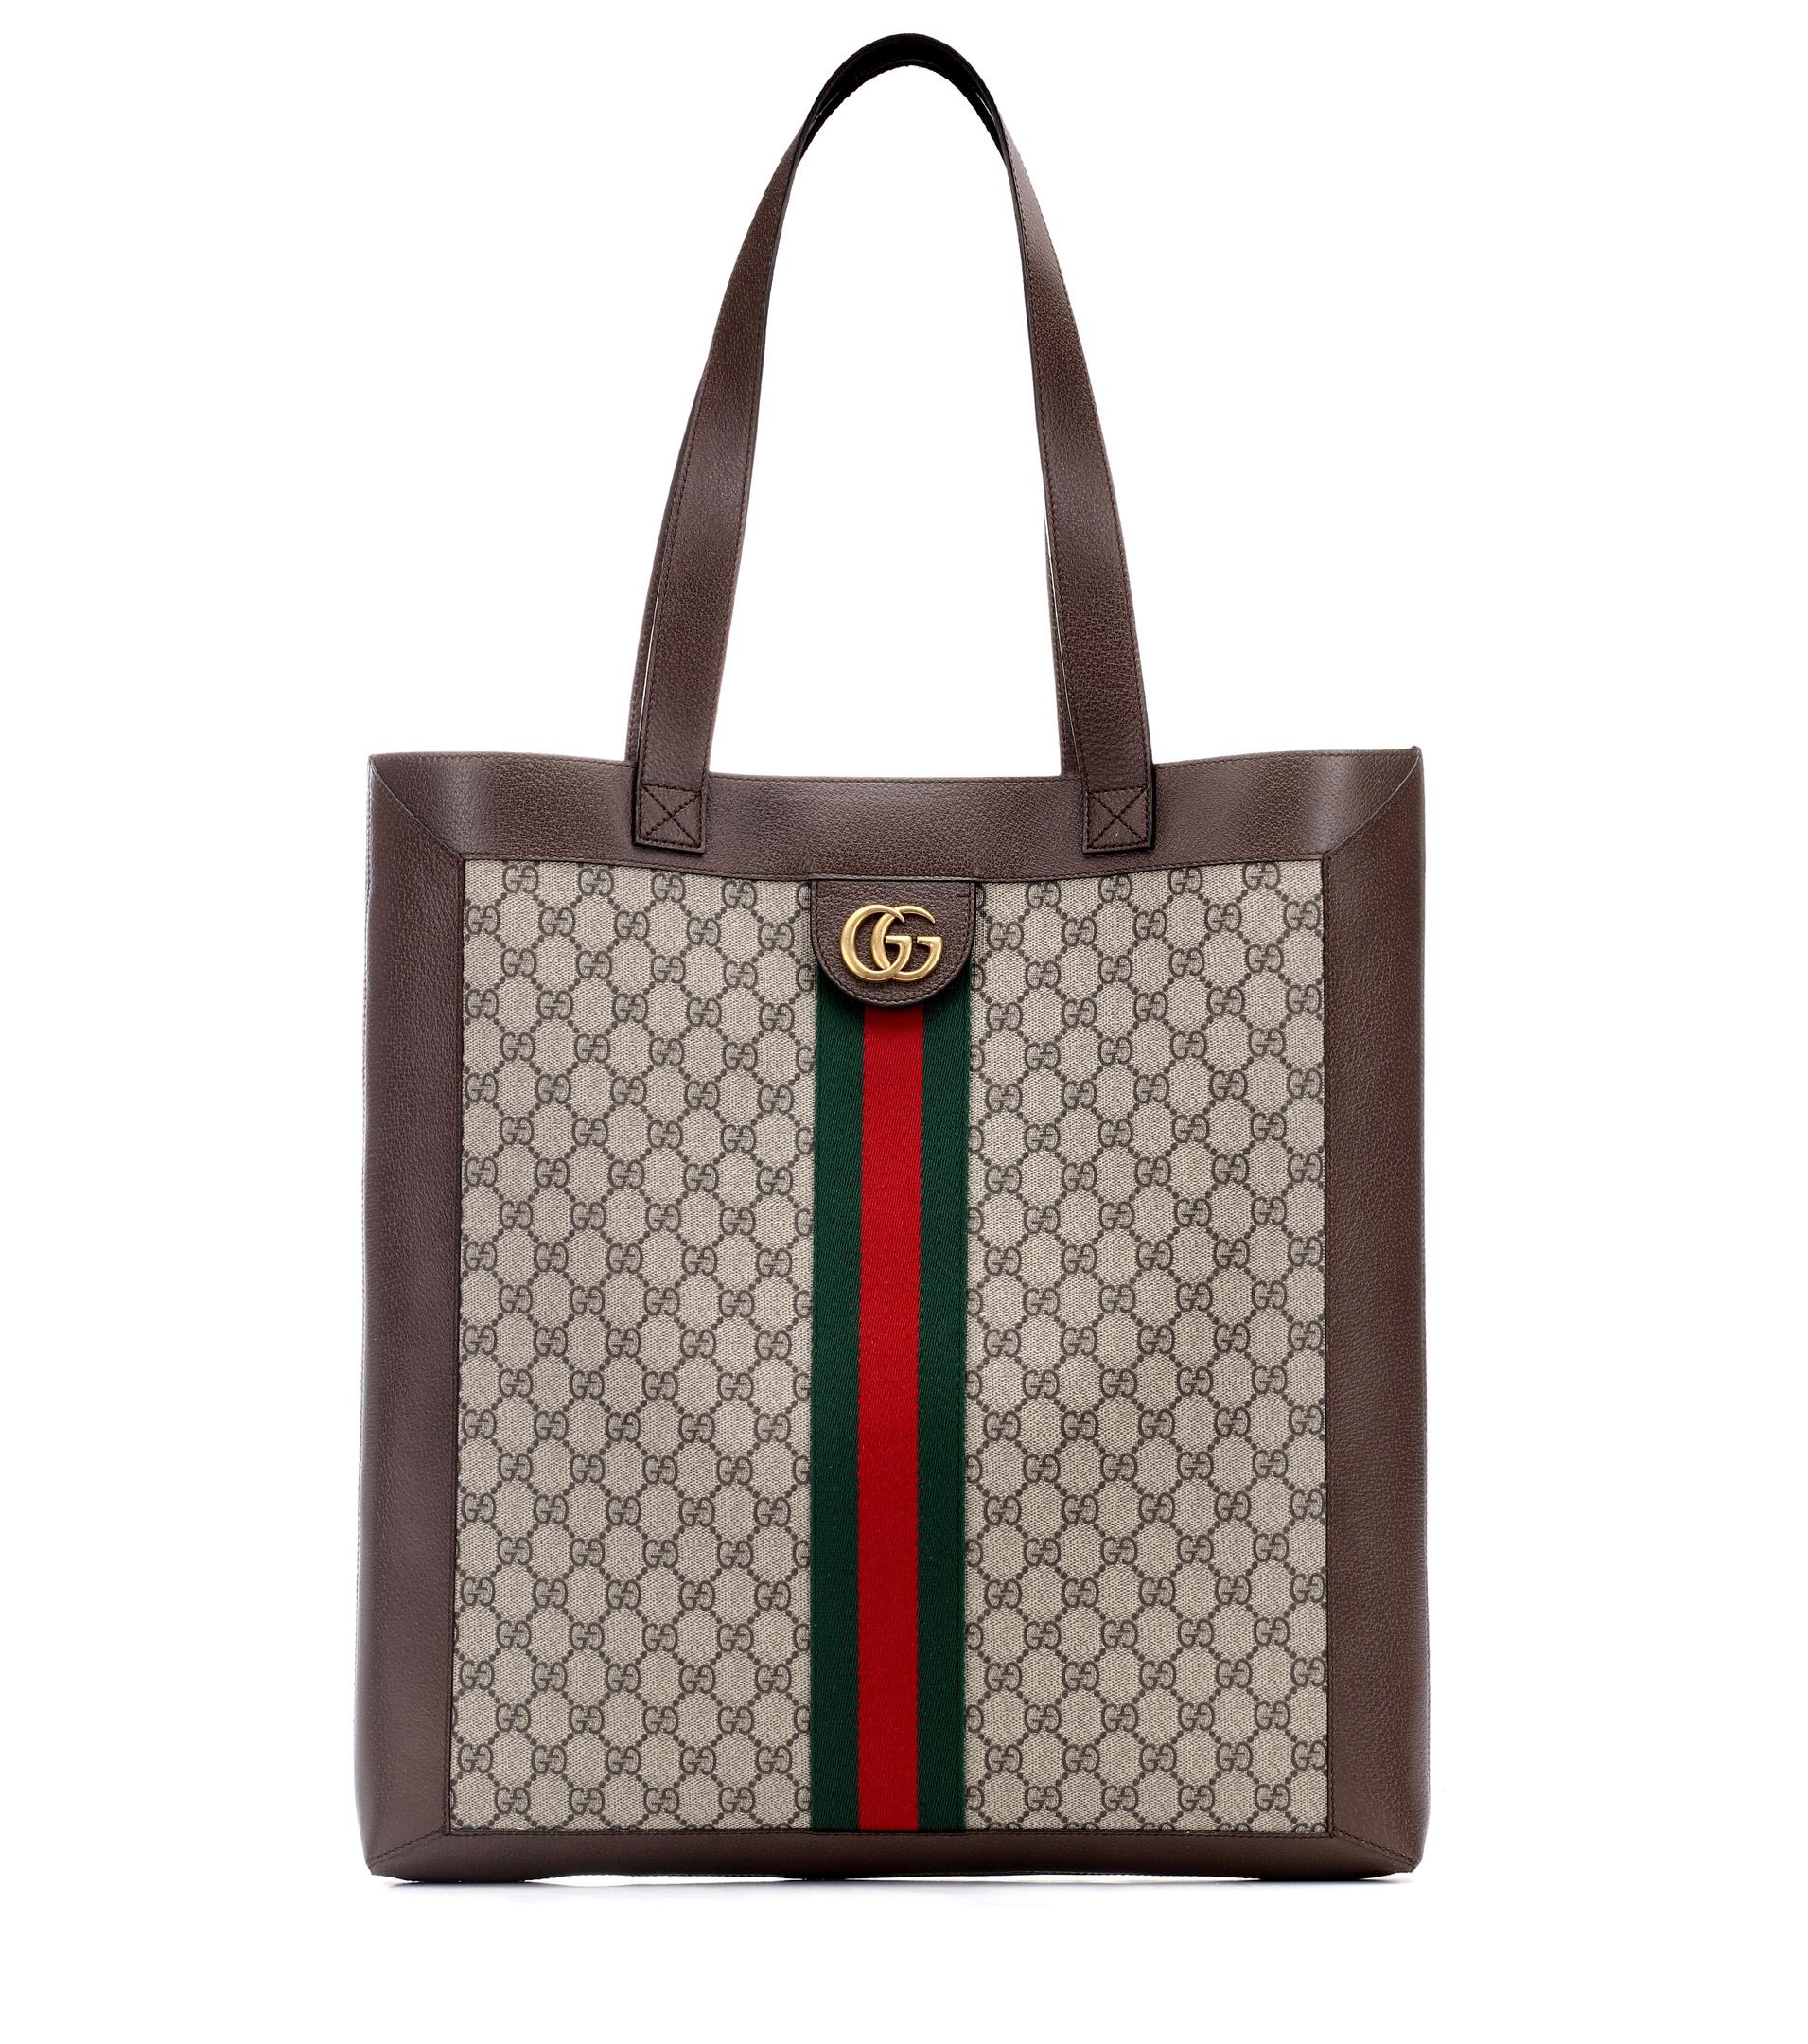 Lyst - Gucci Ophidia Soft Gg Supreme Large Tote in Brown - Save 9.